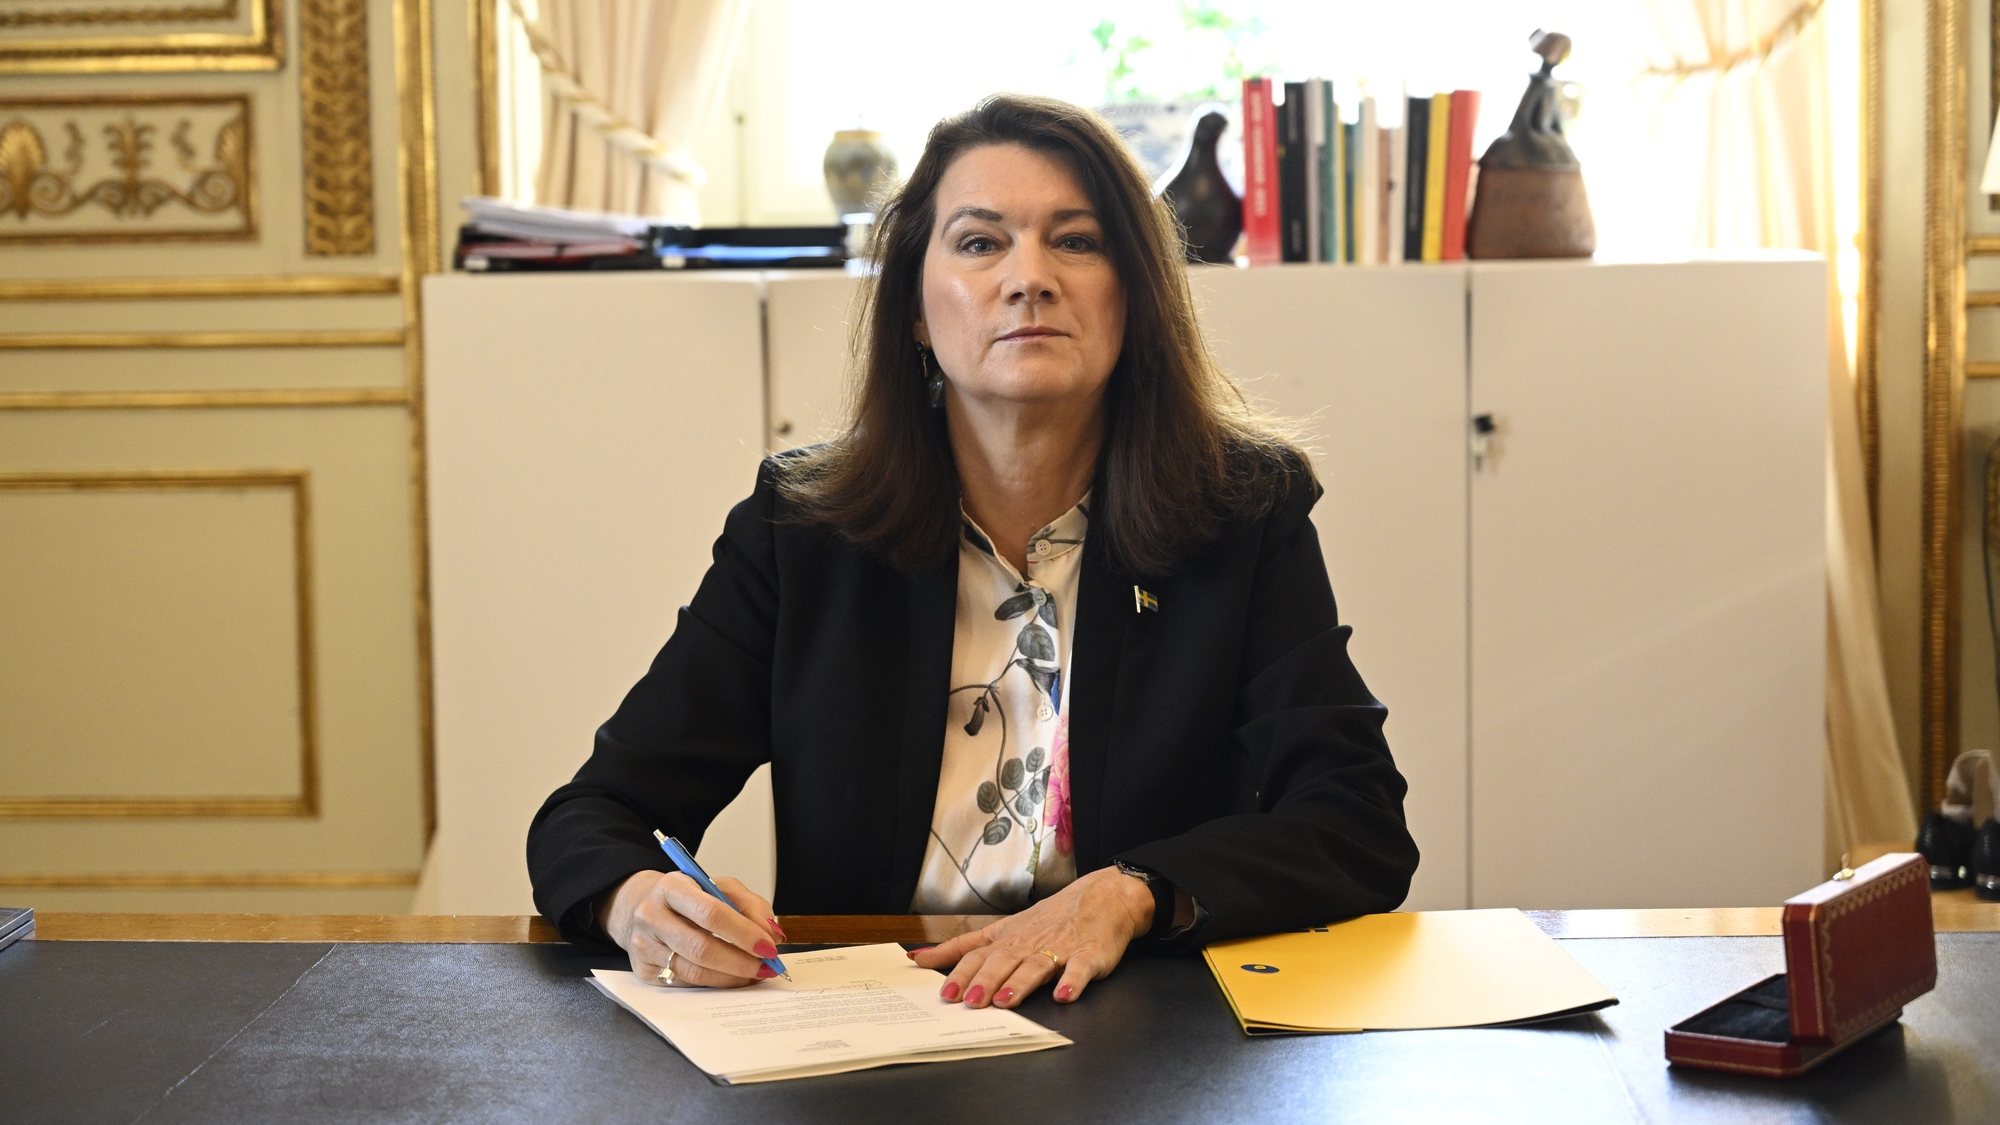 epa09952062 Sweden&#039;s Minister of Foreign Affairs Ann Linde signs Sweden&#039;s application for NATO membership at the Ministry of Foreign Affairs in Stockholm, Sweden, 17 May 2022. The Swedish Parliament the previous day held a special debate about applying for NATO membership. The leaders of Sweden and Finland have confirmed they will apply for NATO membership as a result of Russia&#039;s invasion of Ukraine.  EPA/Henrik Montgomery  EPA-EFE/Henrik Montgomery  SWEDEN OUT